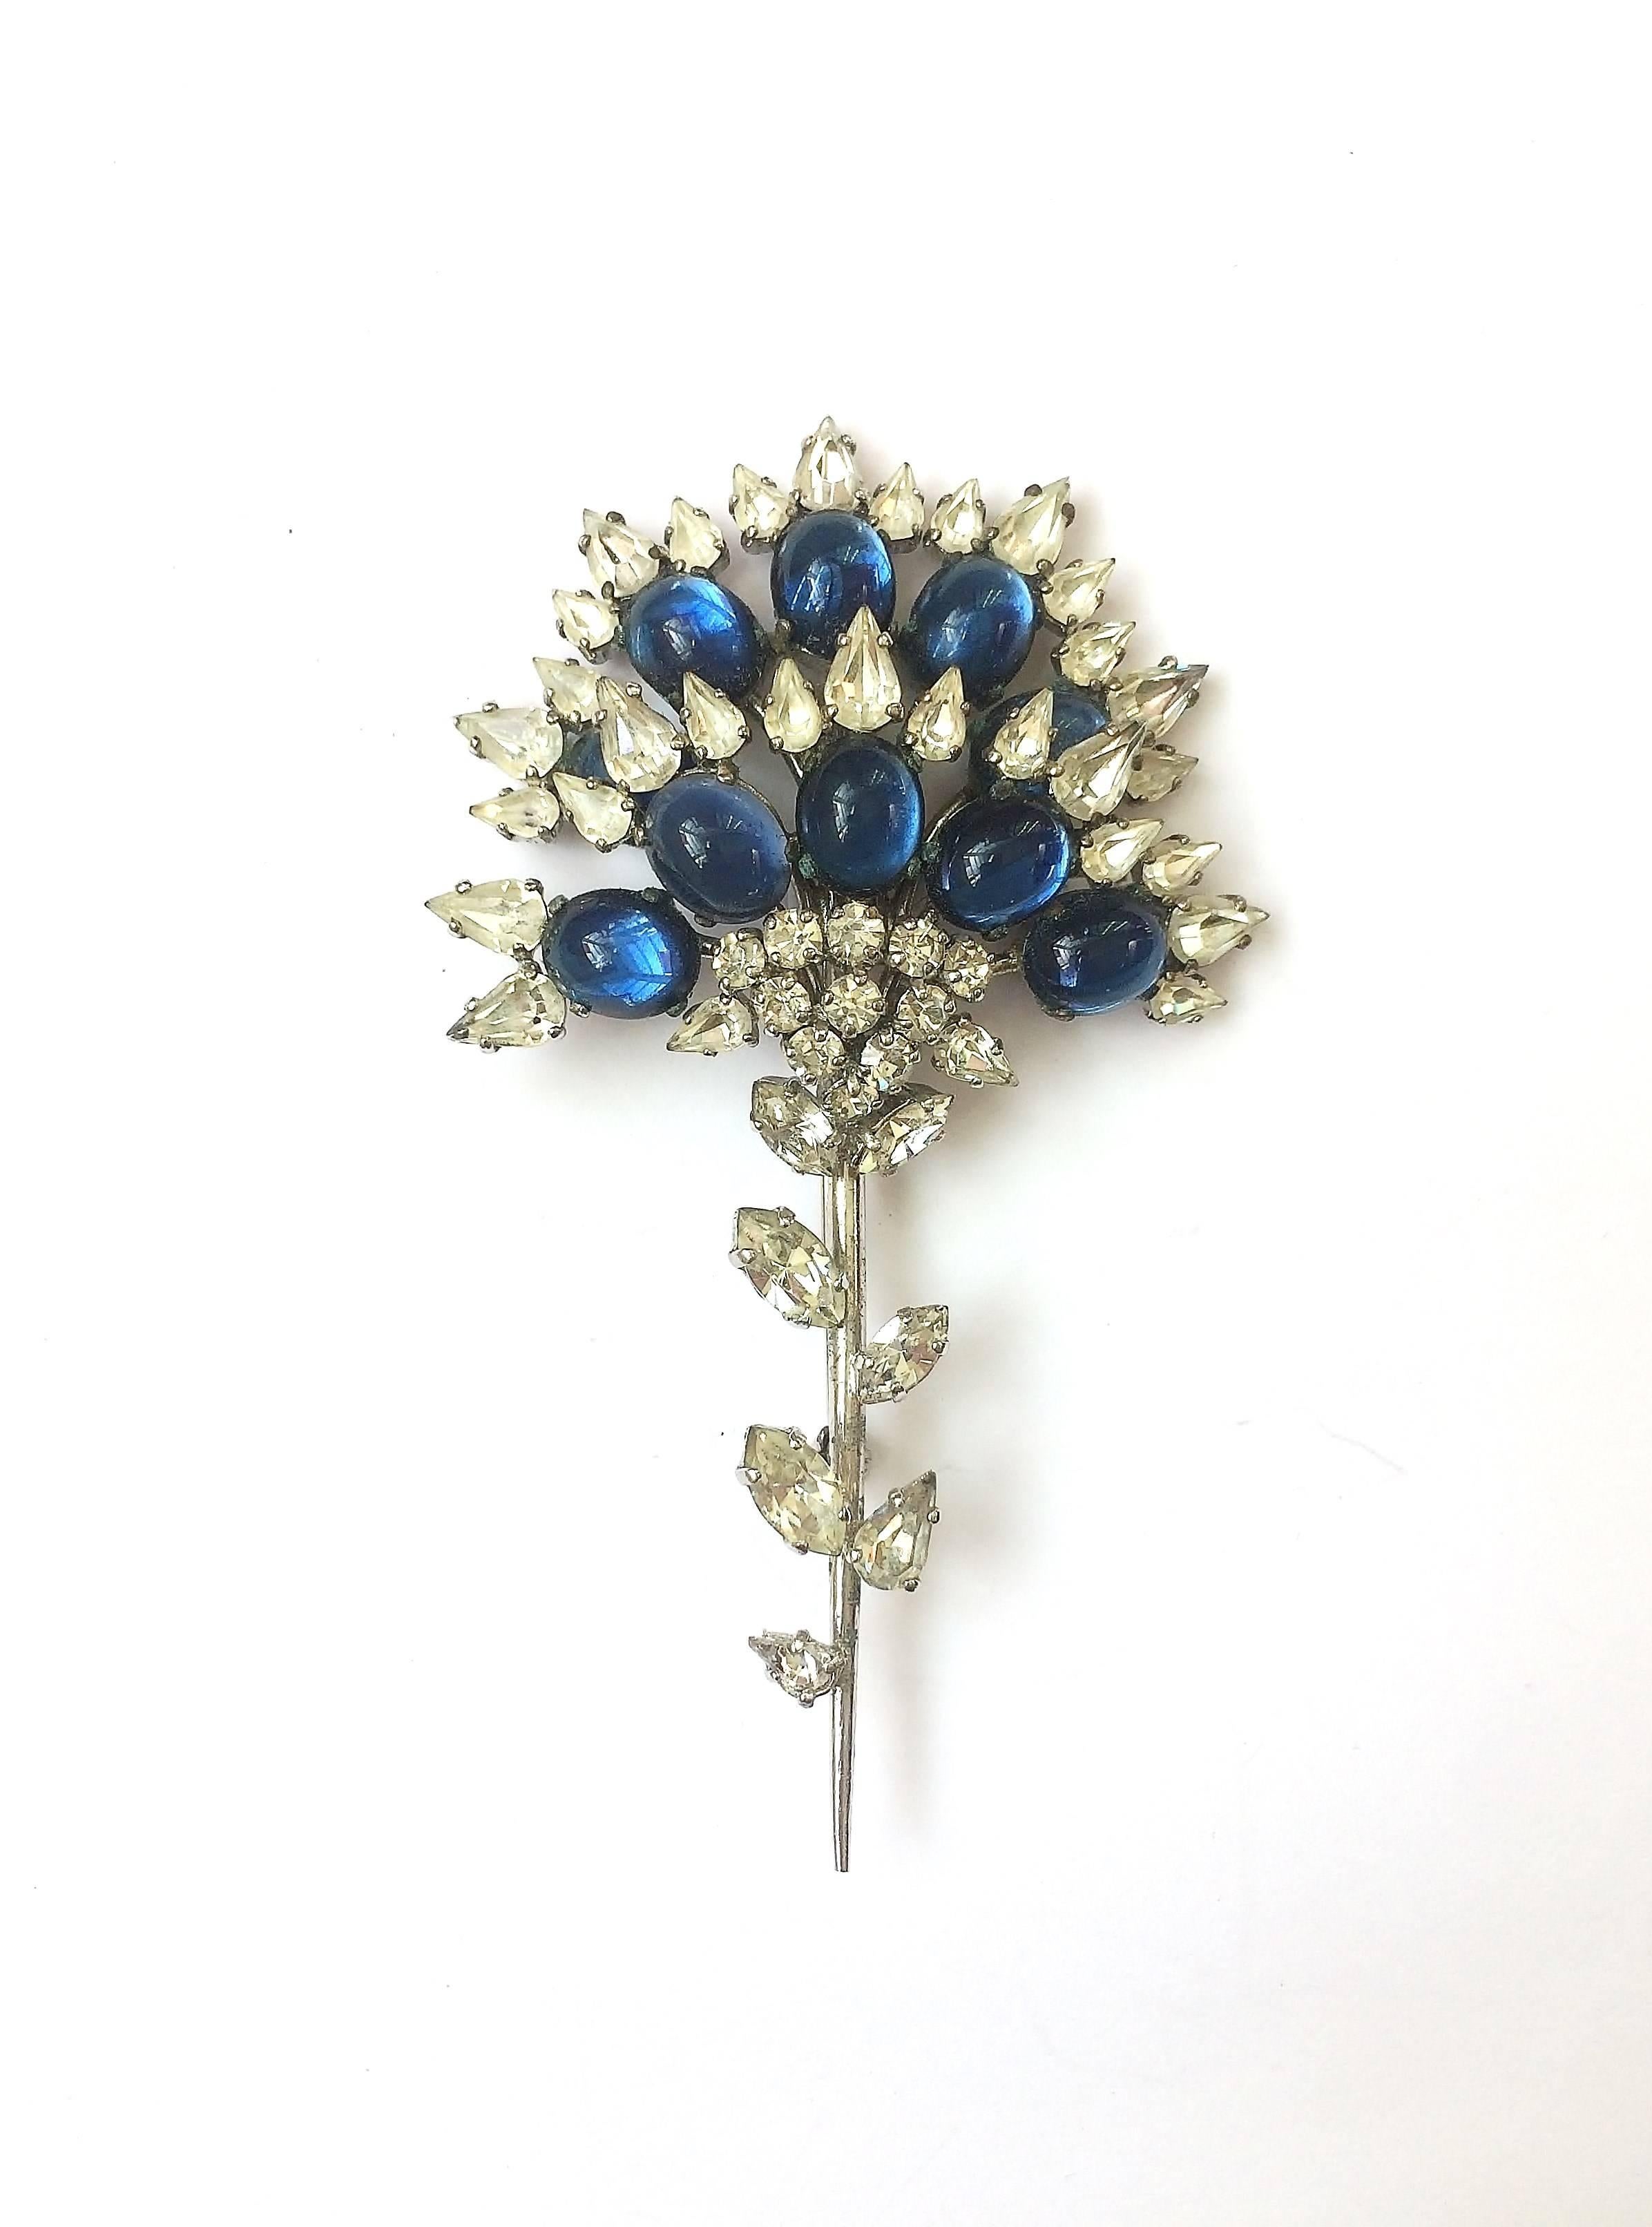 A splendid  stylised floral brooch, designed by Francis Winter, one of the great early designers for Christian Dior, and made in Germany by Henkel and Grosse, is made of deep sapphire paste cabuchons and clear paste, some open backed, others prong